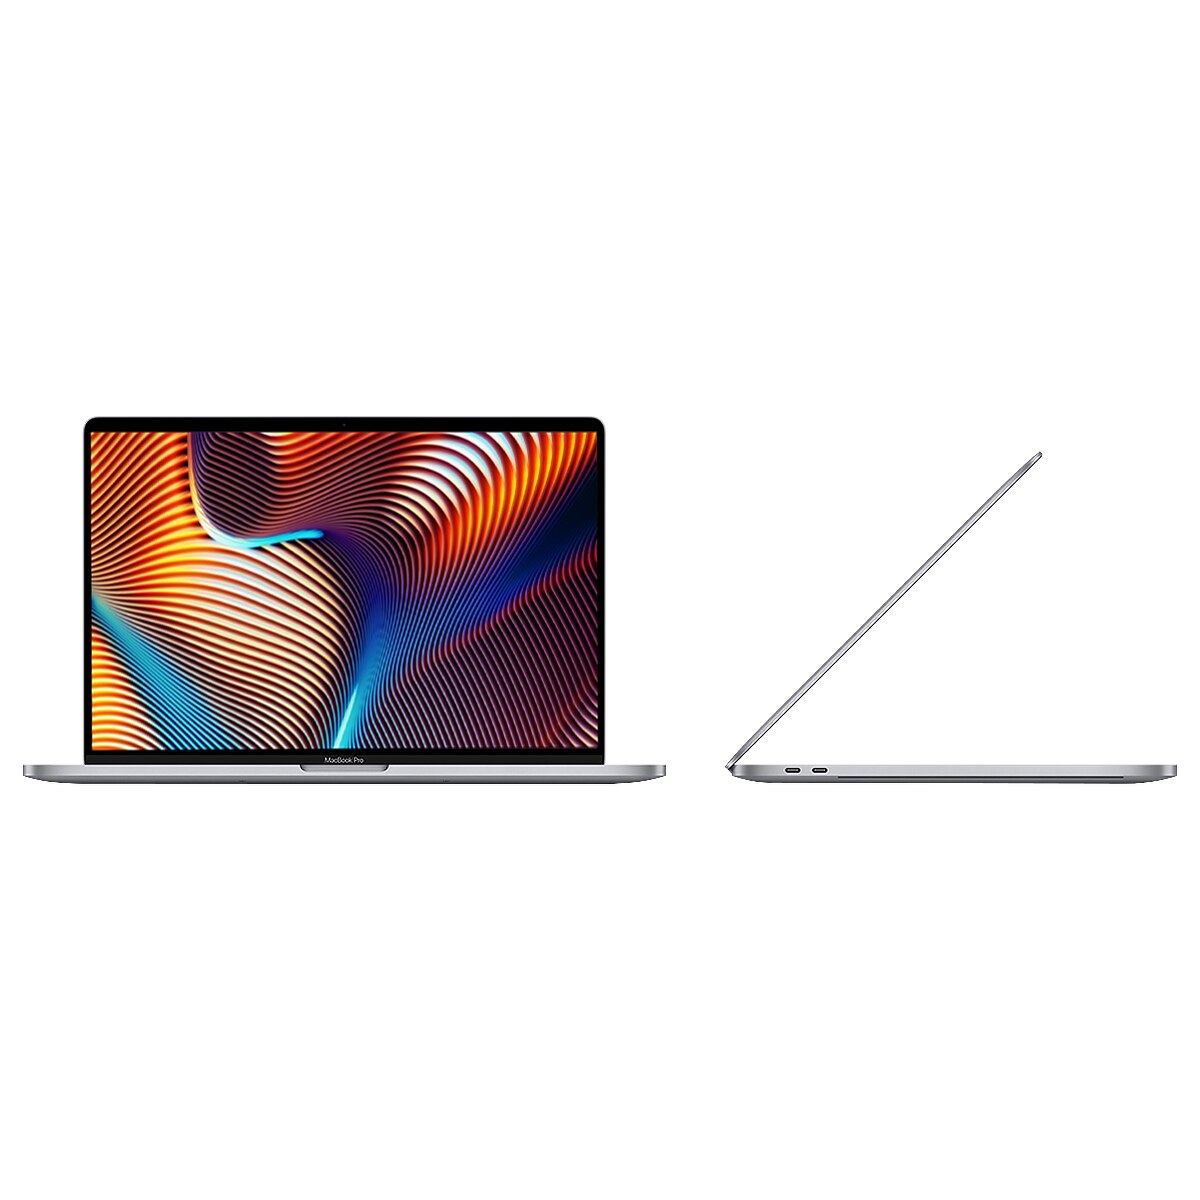 Macbook Pro MUHP2X/A 13-inch MacBook Pro with Touch Bar: 1.4GHz quad-core 8th-generation Intel Core i5 processor, 256GB - Space Grey